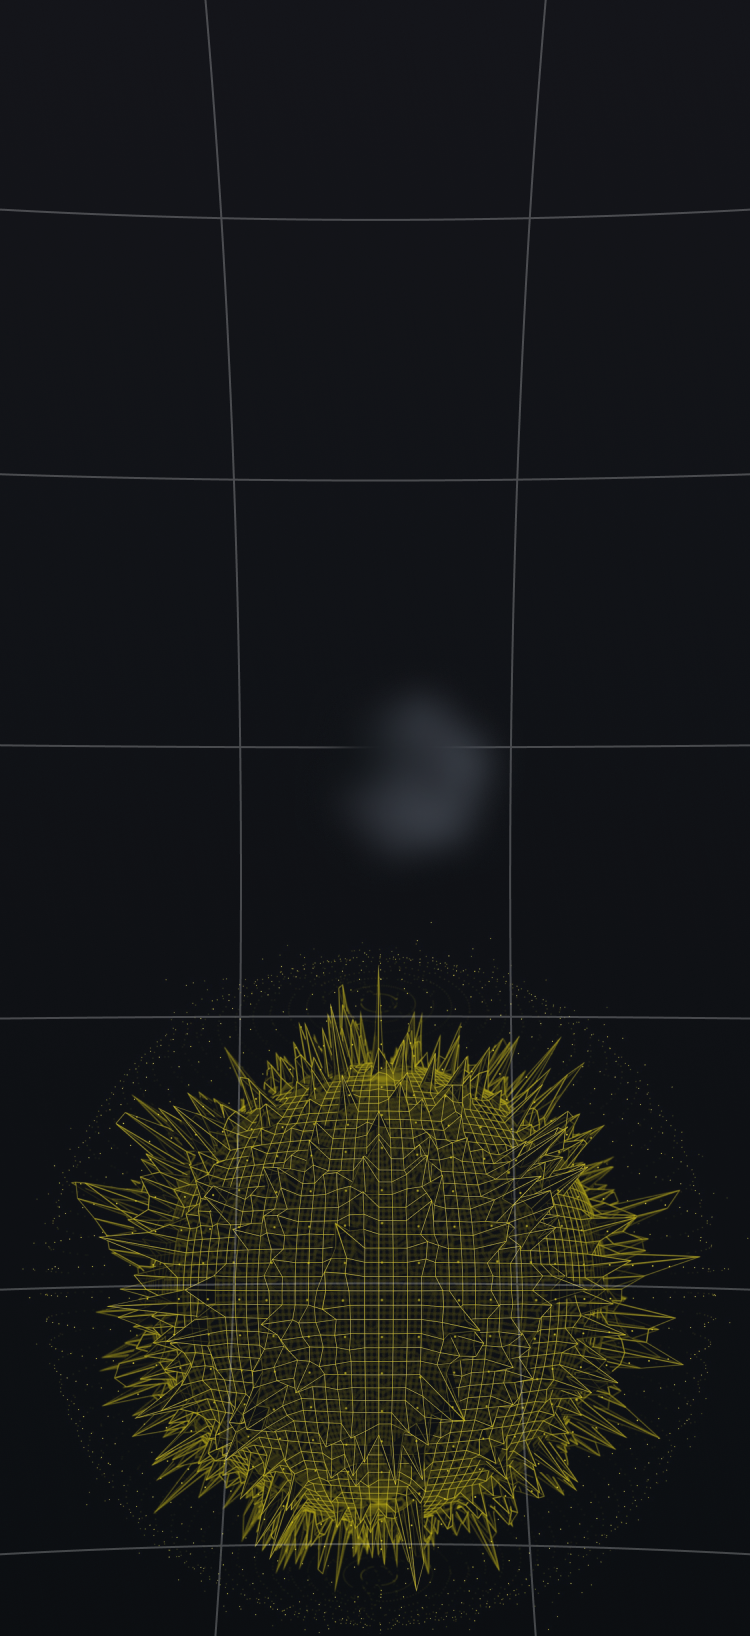 Spiky Ball in 3D Space